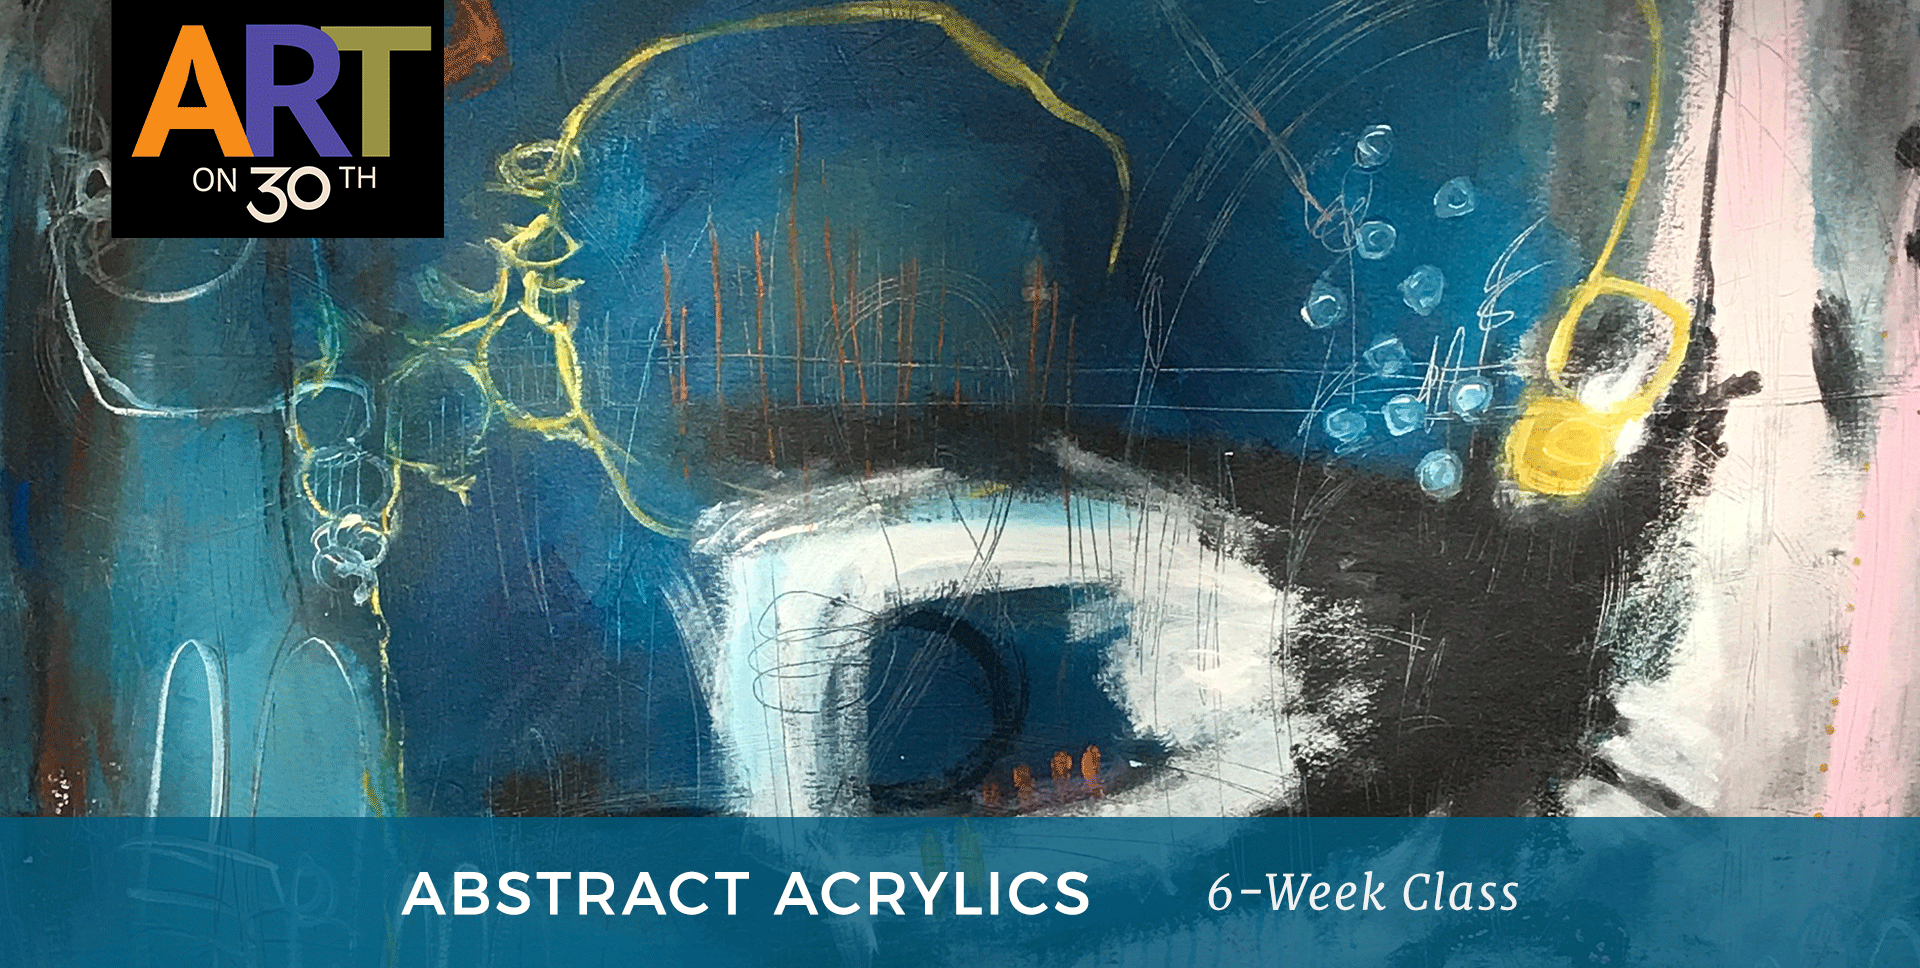 WED - Abstract Acrylic Painting with Ann Golumbuk & Laurie Fuller